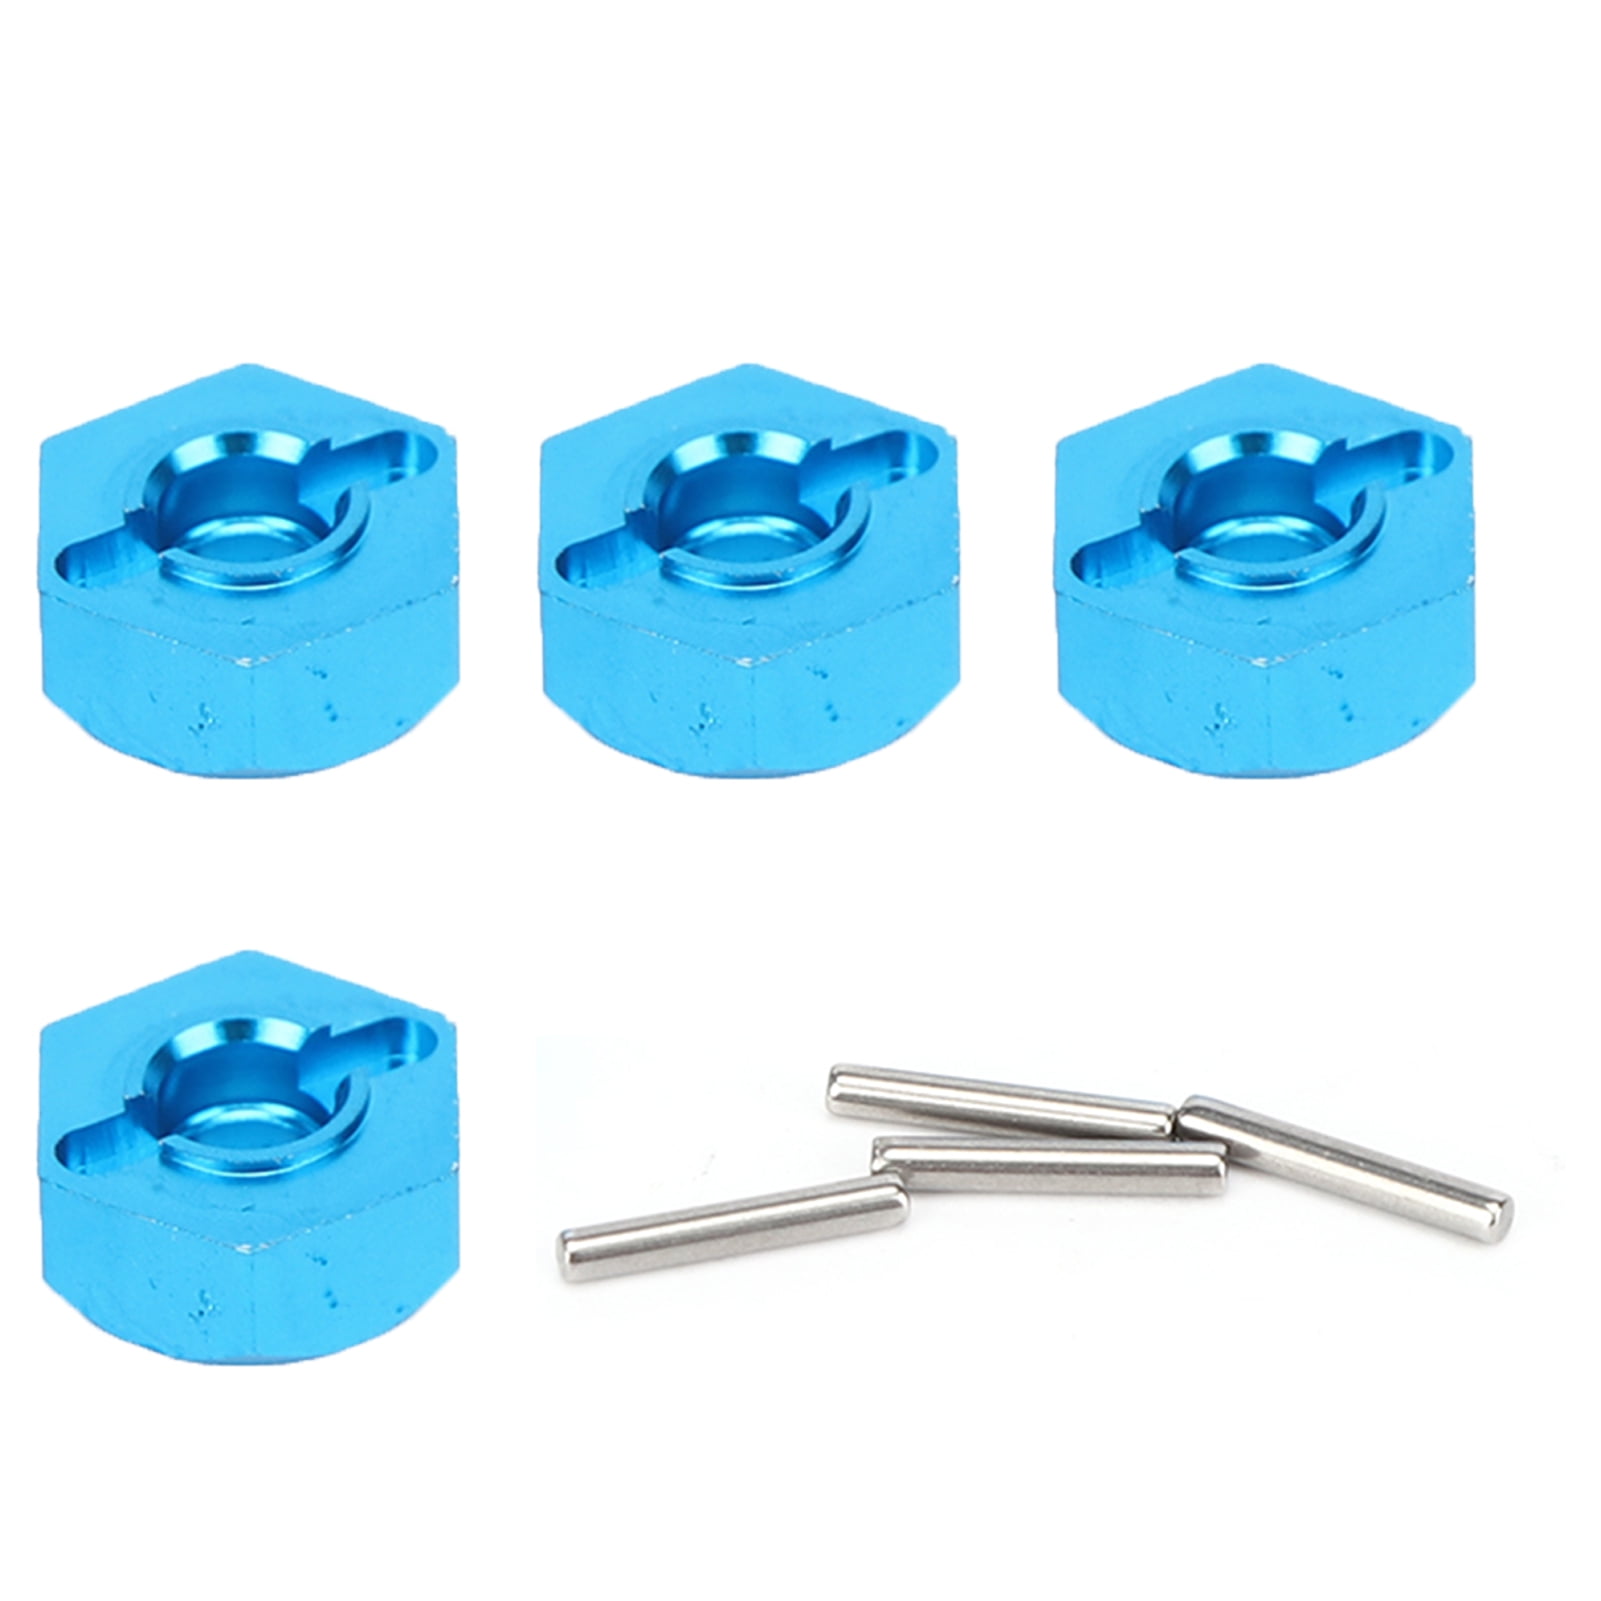 Blue 1266B RC Wheel Hex Mount Hubs Nut,5MM Wheel Hex Mount Hubs Nut with Pins Fit for WLtoys 1/14 144001 RC Car